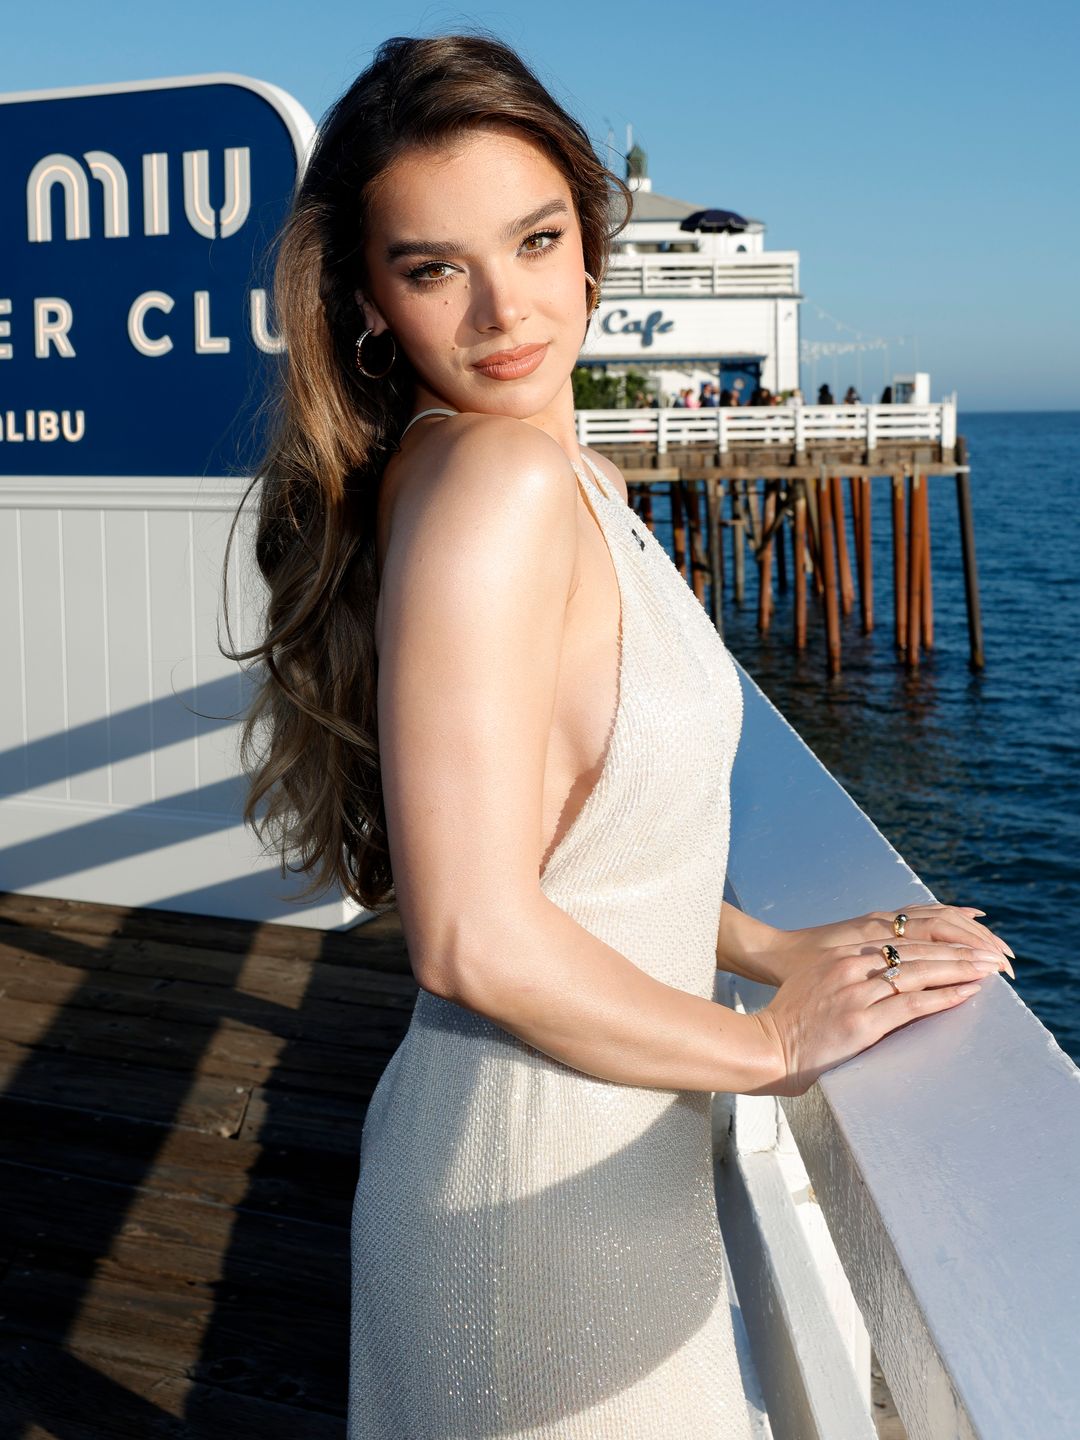 Hailee Steinfeld posing for a photo on a pier